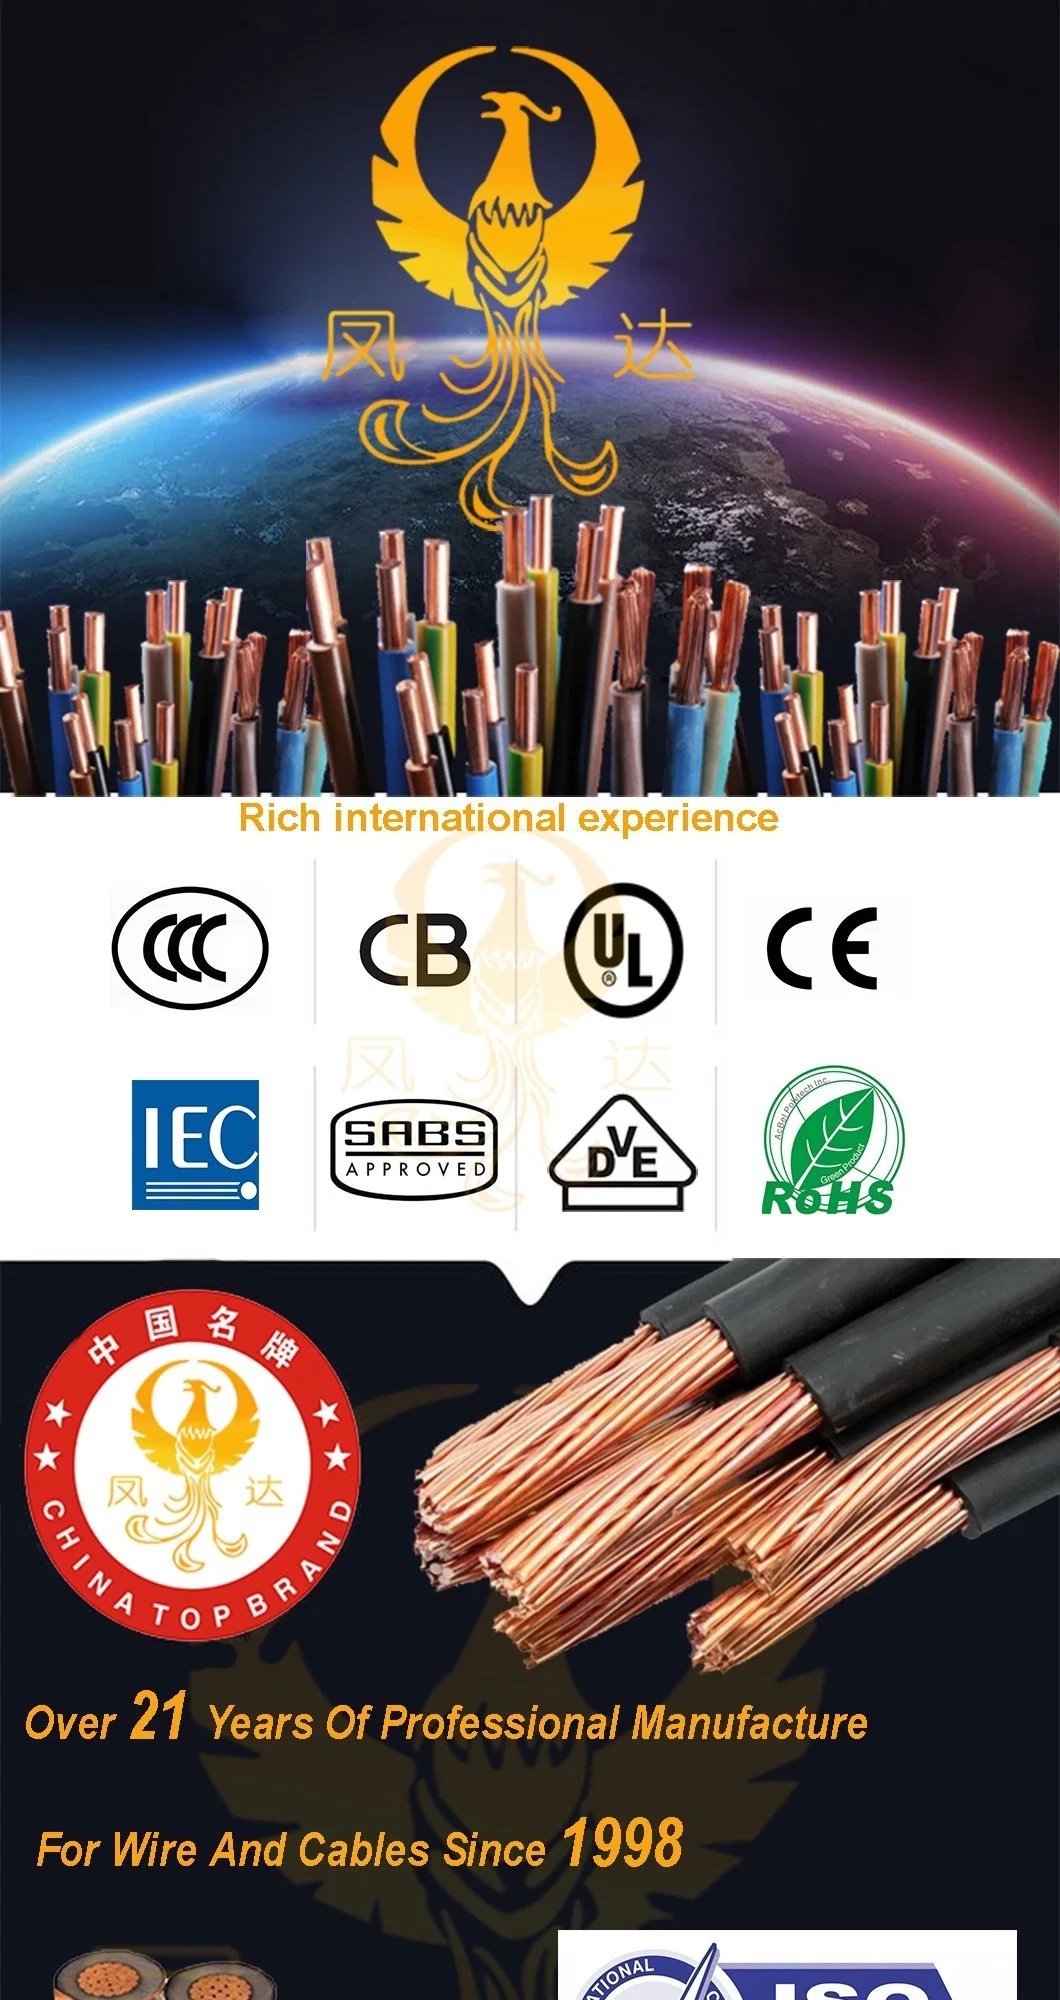 PVC Single Core Solid Copper Conductor Electrical Wire for House Wiring, H05V-U/H07V-U Double Insulated PVC Wire Cable